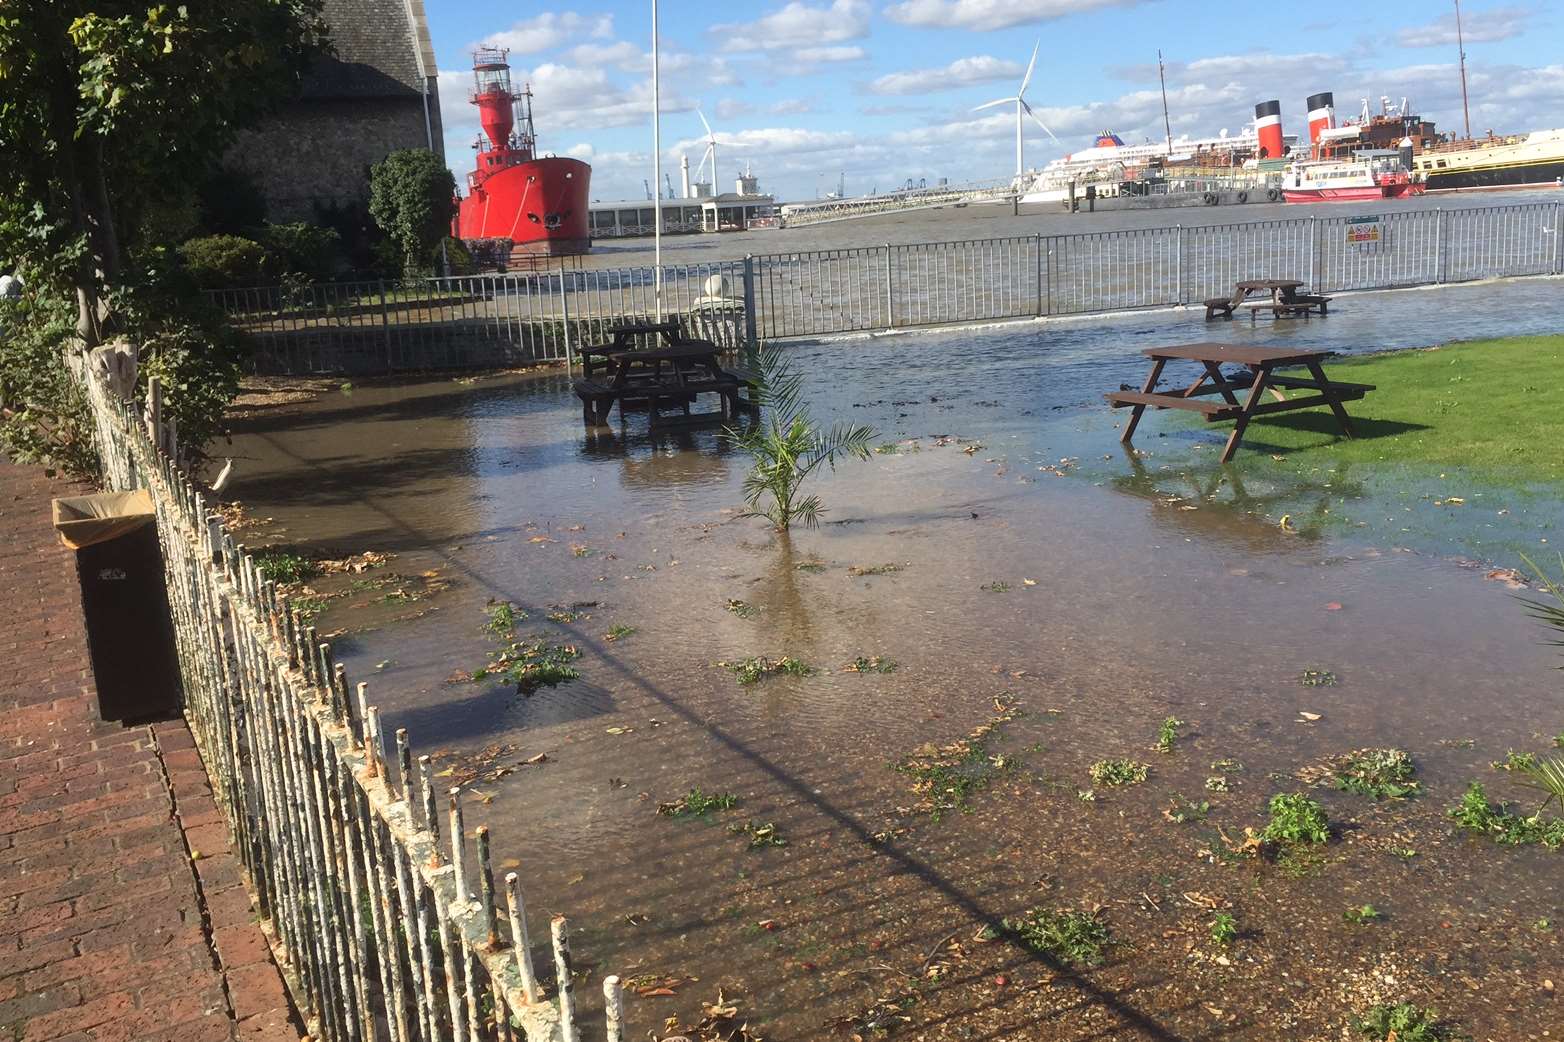 The water rose higher than usual. Picture: Pete Clarke